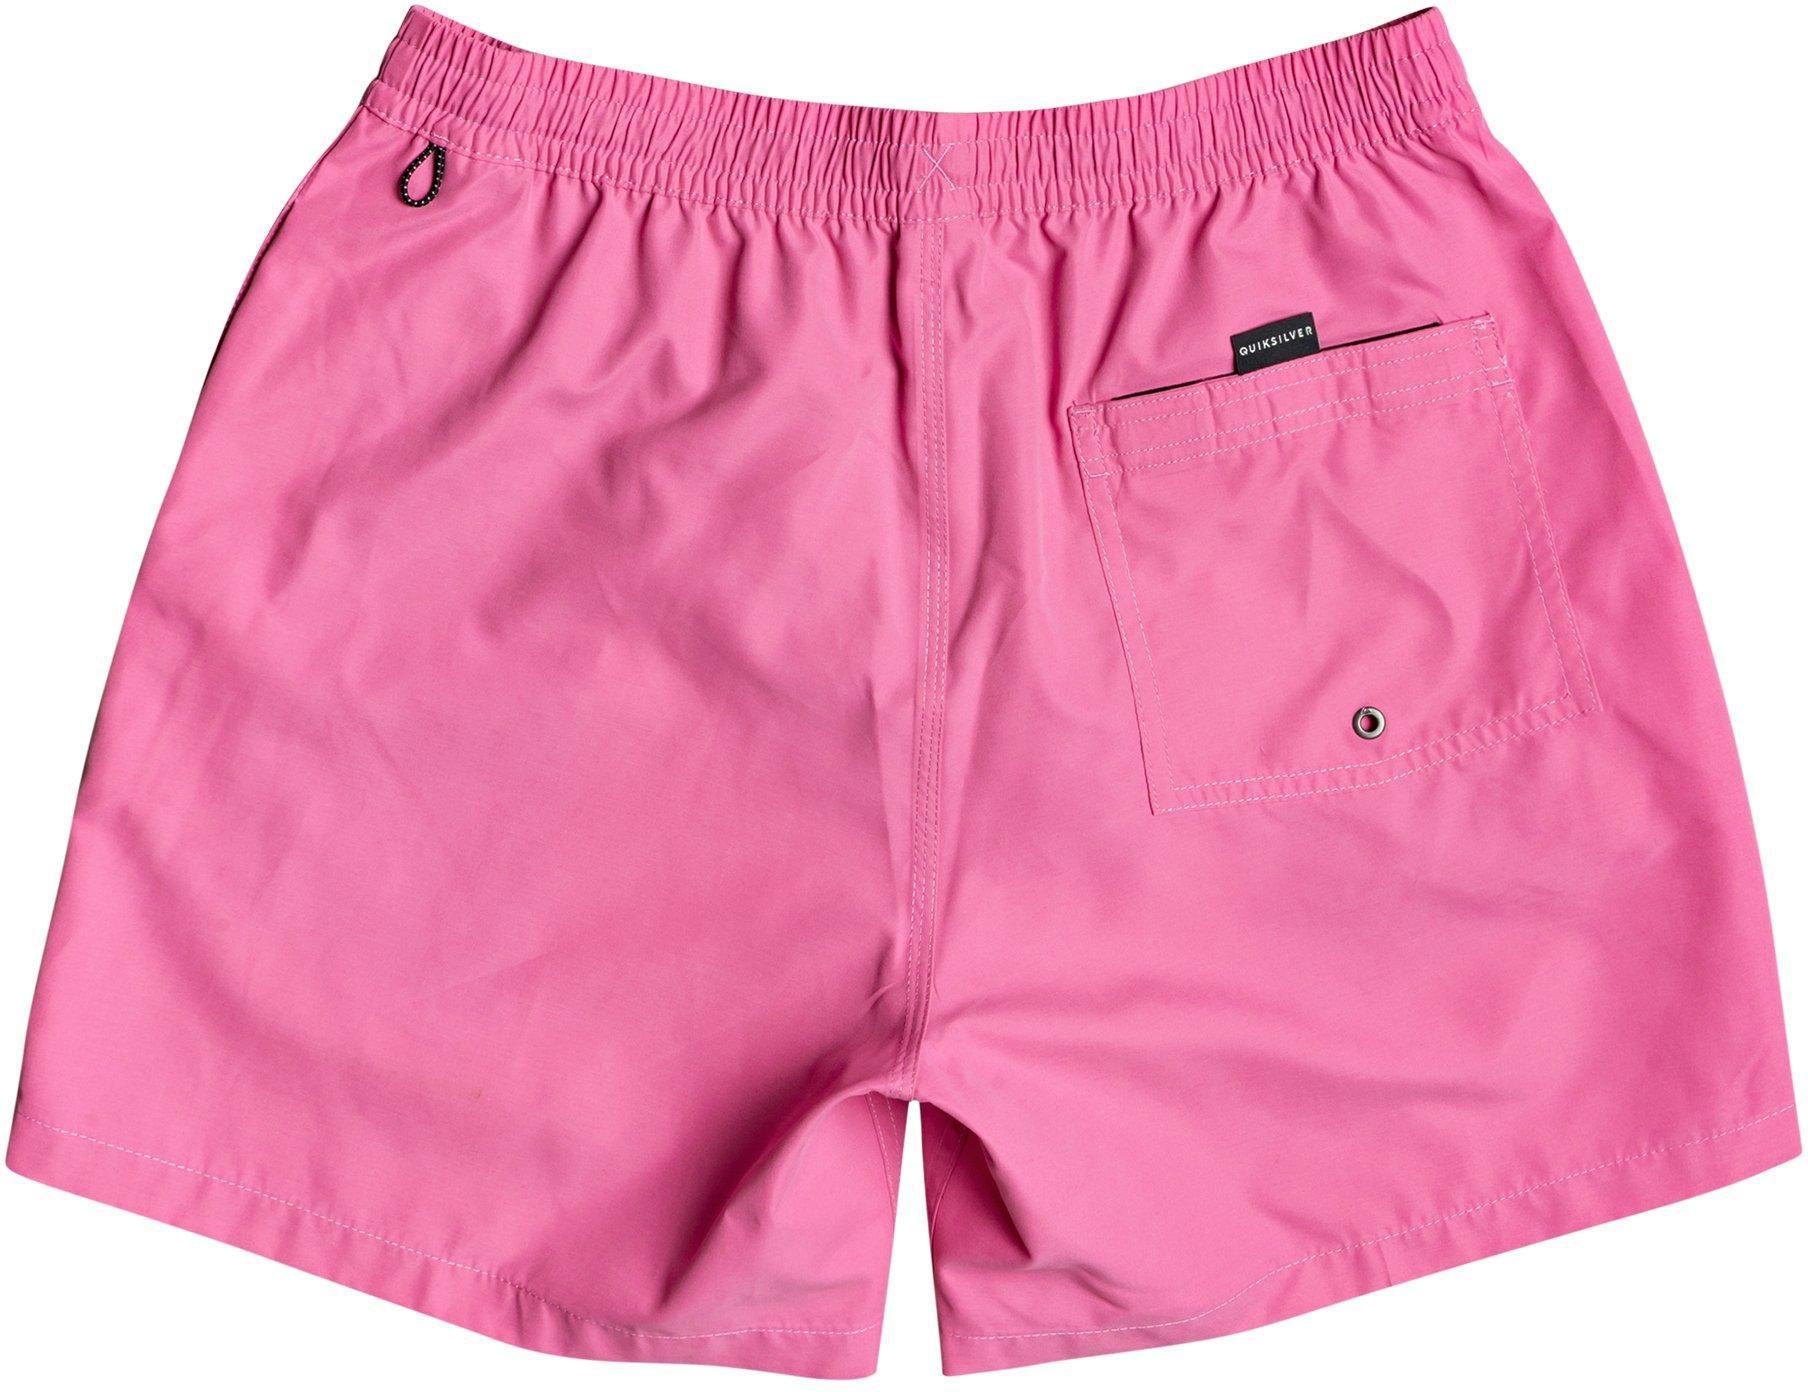 Quiksilver Everyday Volley Board Shorts in Pink for Men - Lyst